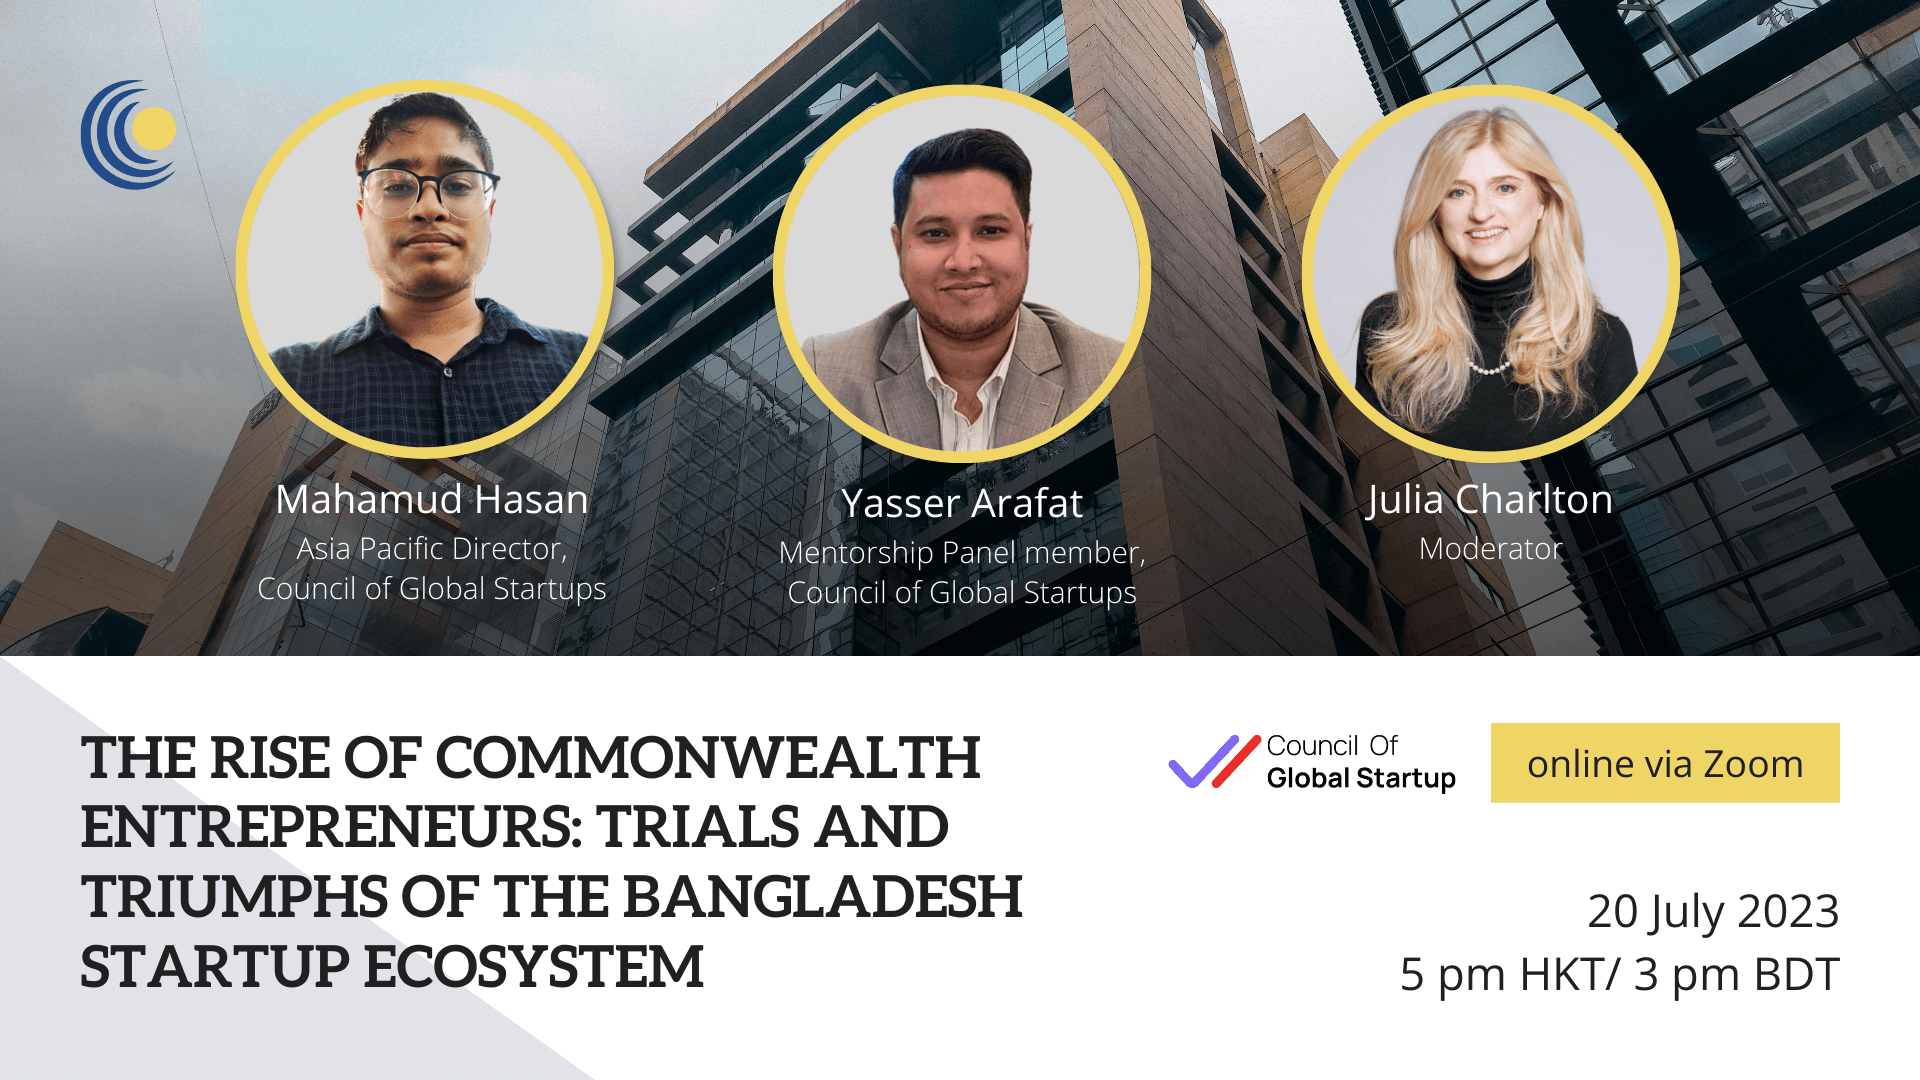 The Rise of Commonwealth Entrepreneurs: Trials and Triumphs of the Bangladesh Startup Ecosystem